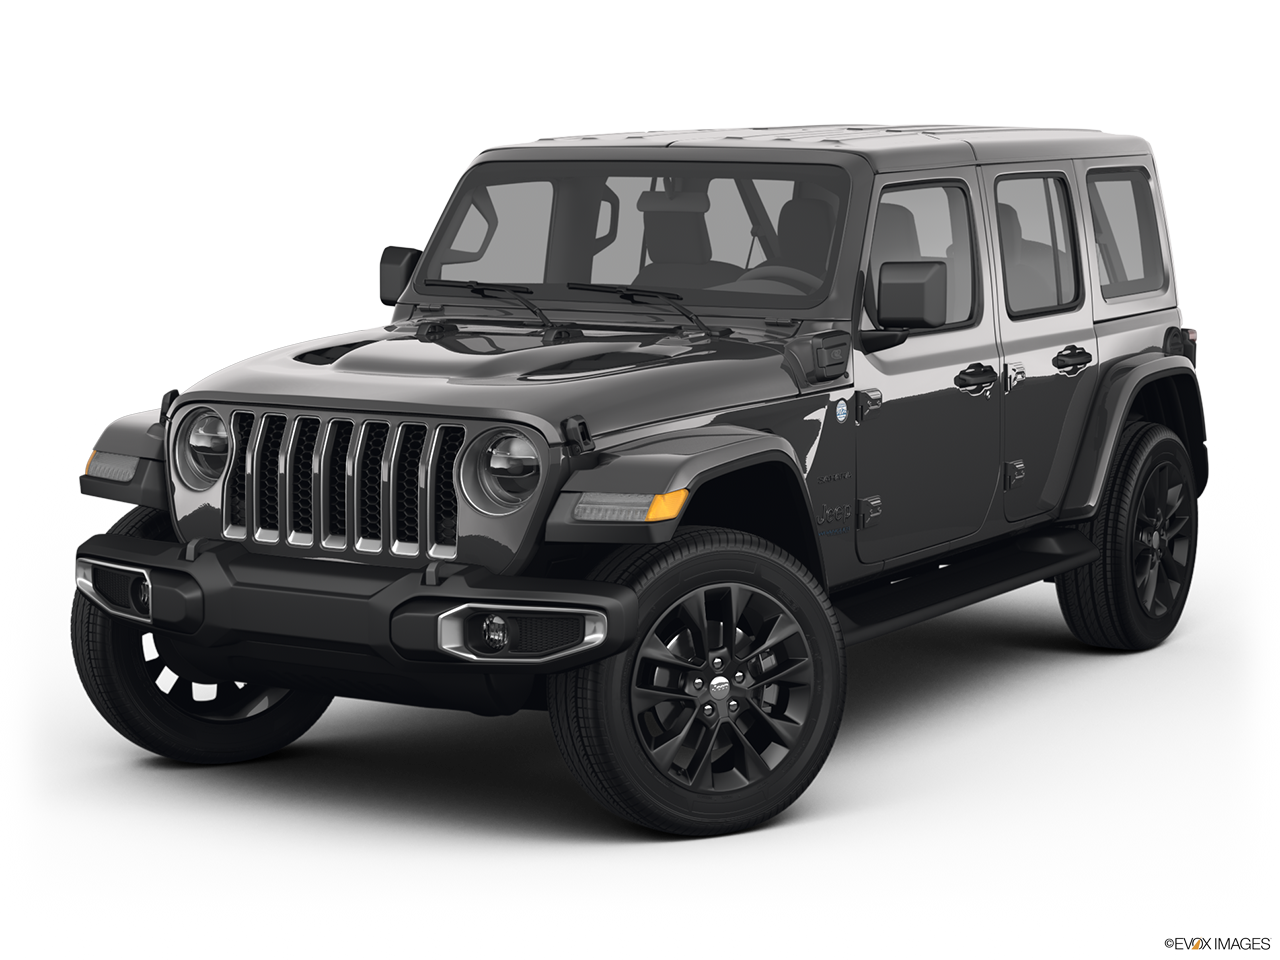 The first 7-passenger Jeep Wrangler is a big deal